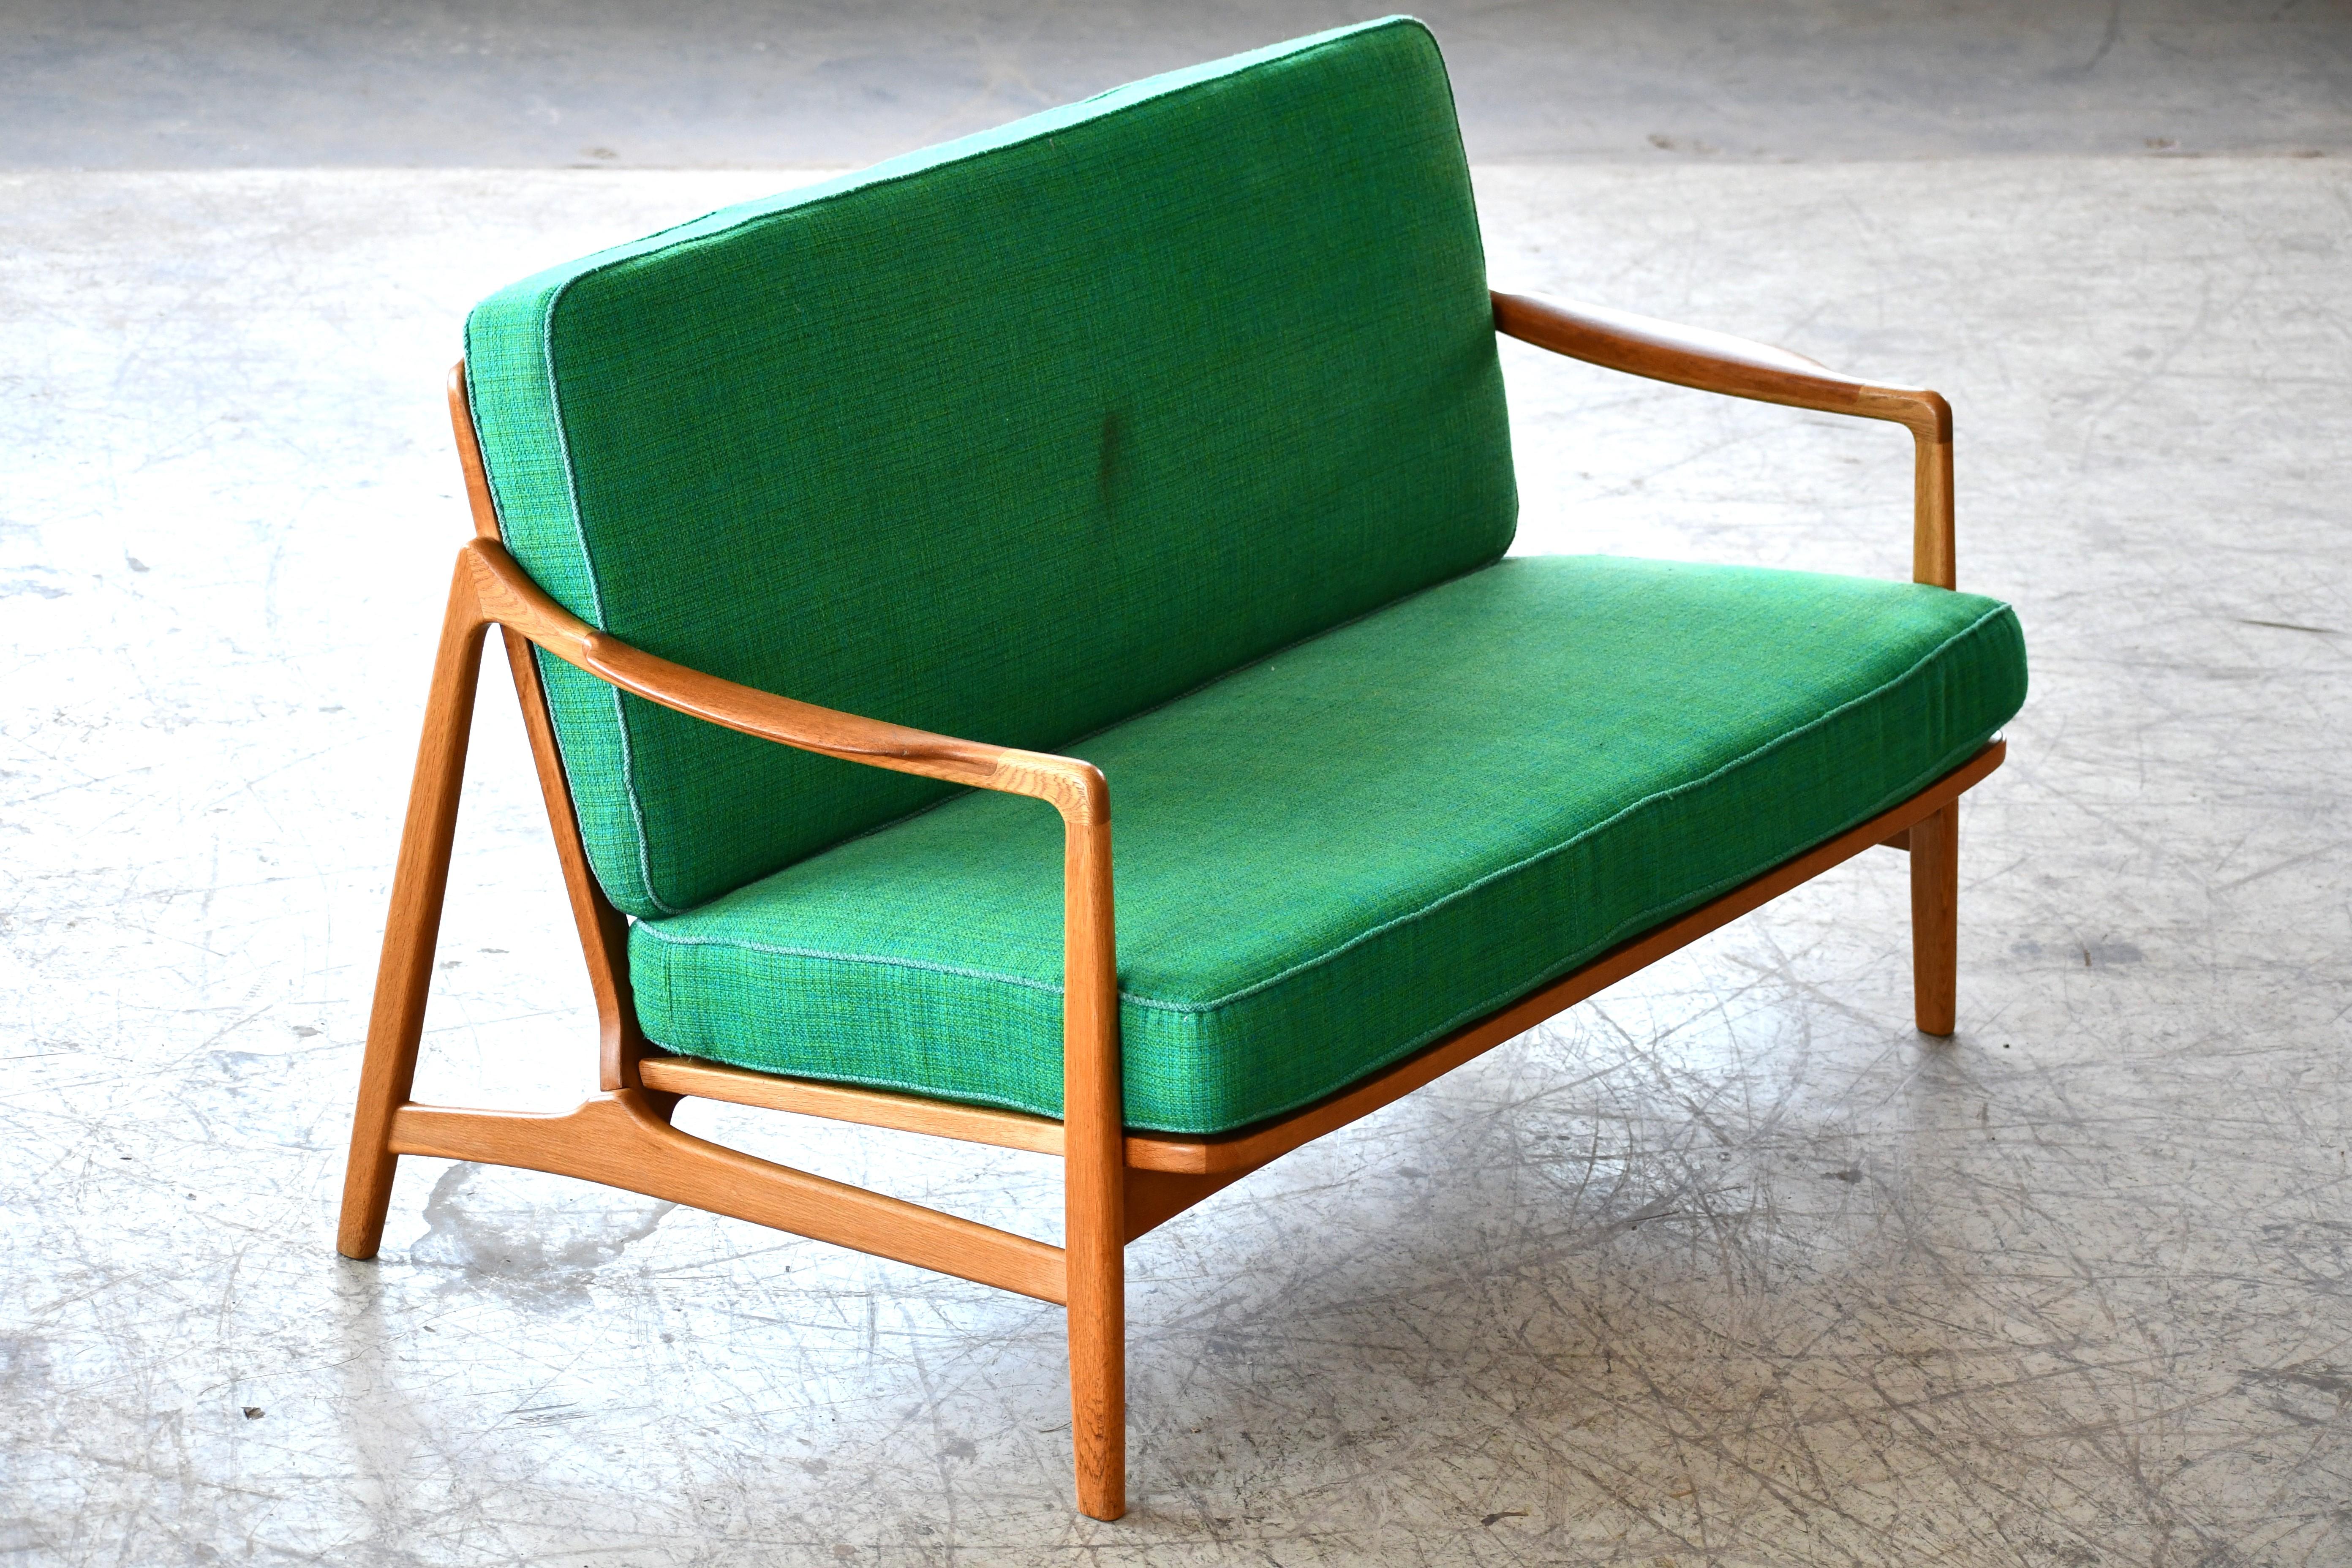 Rare Danish settee by Famed Danish Design Duo,Tove & Edward Kindt-Larsen. Produced by France & Daverkosen, Denmark early 1950s. Tove Kindt-Larsen (1906-1994) was one of Denmark’s most prominent designers from the 1930s to the 1960s. With a high